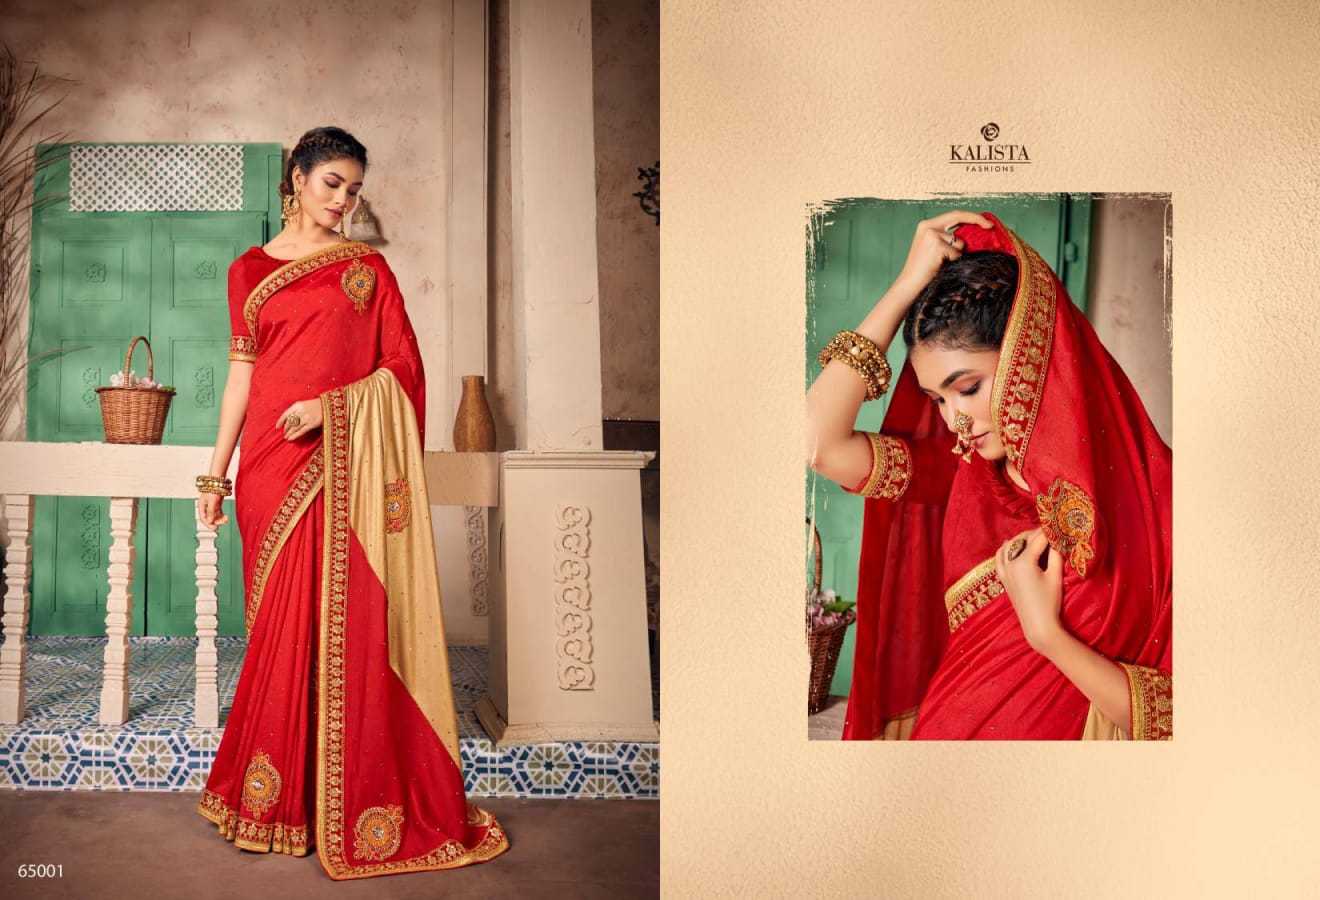 KALISTA PRESENTS BIG BOSS FANCY VICHITRA PRETTY LOOK SAREE WITH BLOUSE SUPPLIER